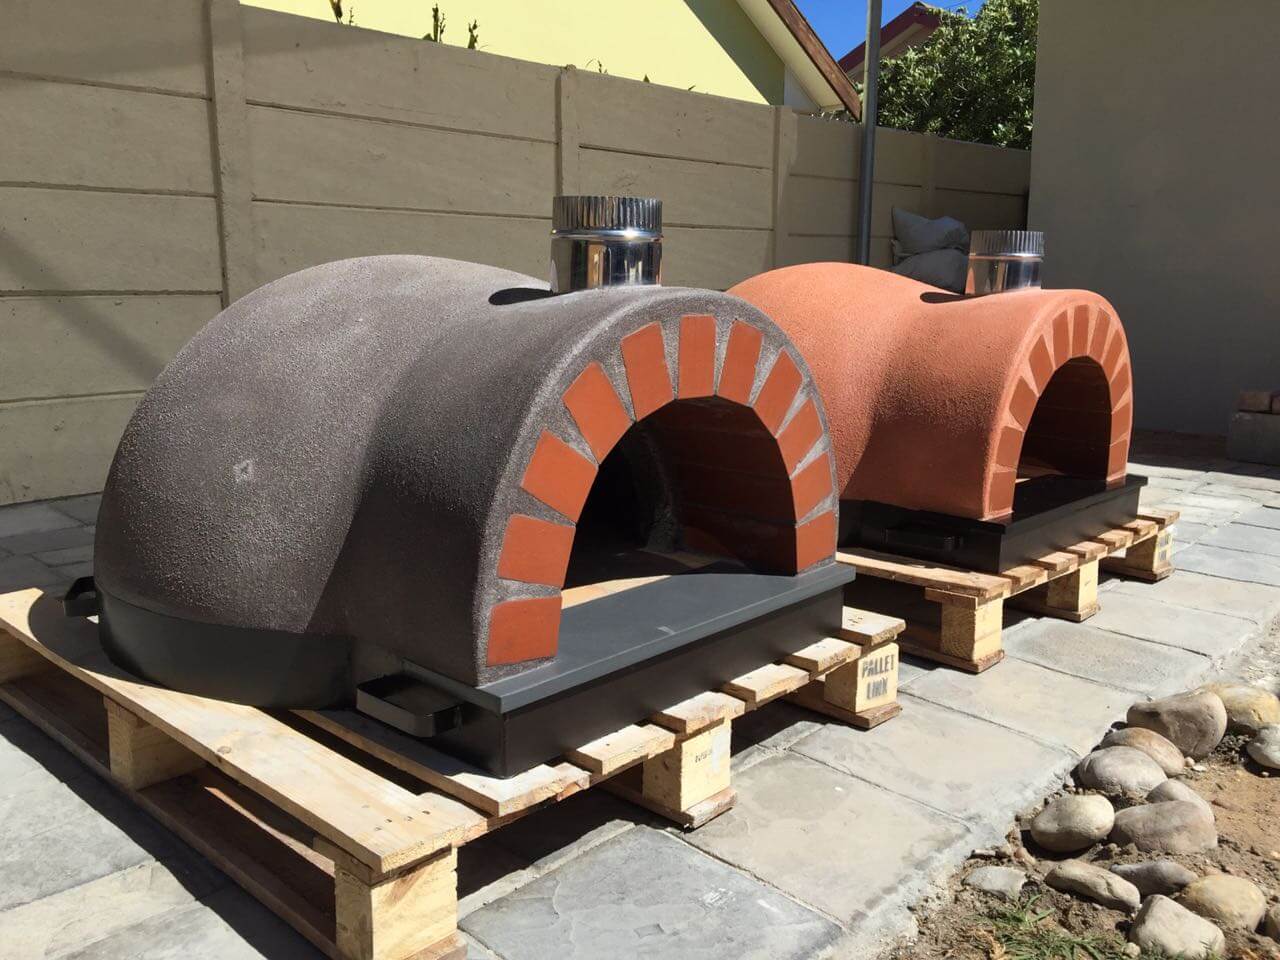 We Deliver Pizza Ovens To You - Eco Pizza Ovens